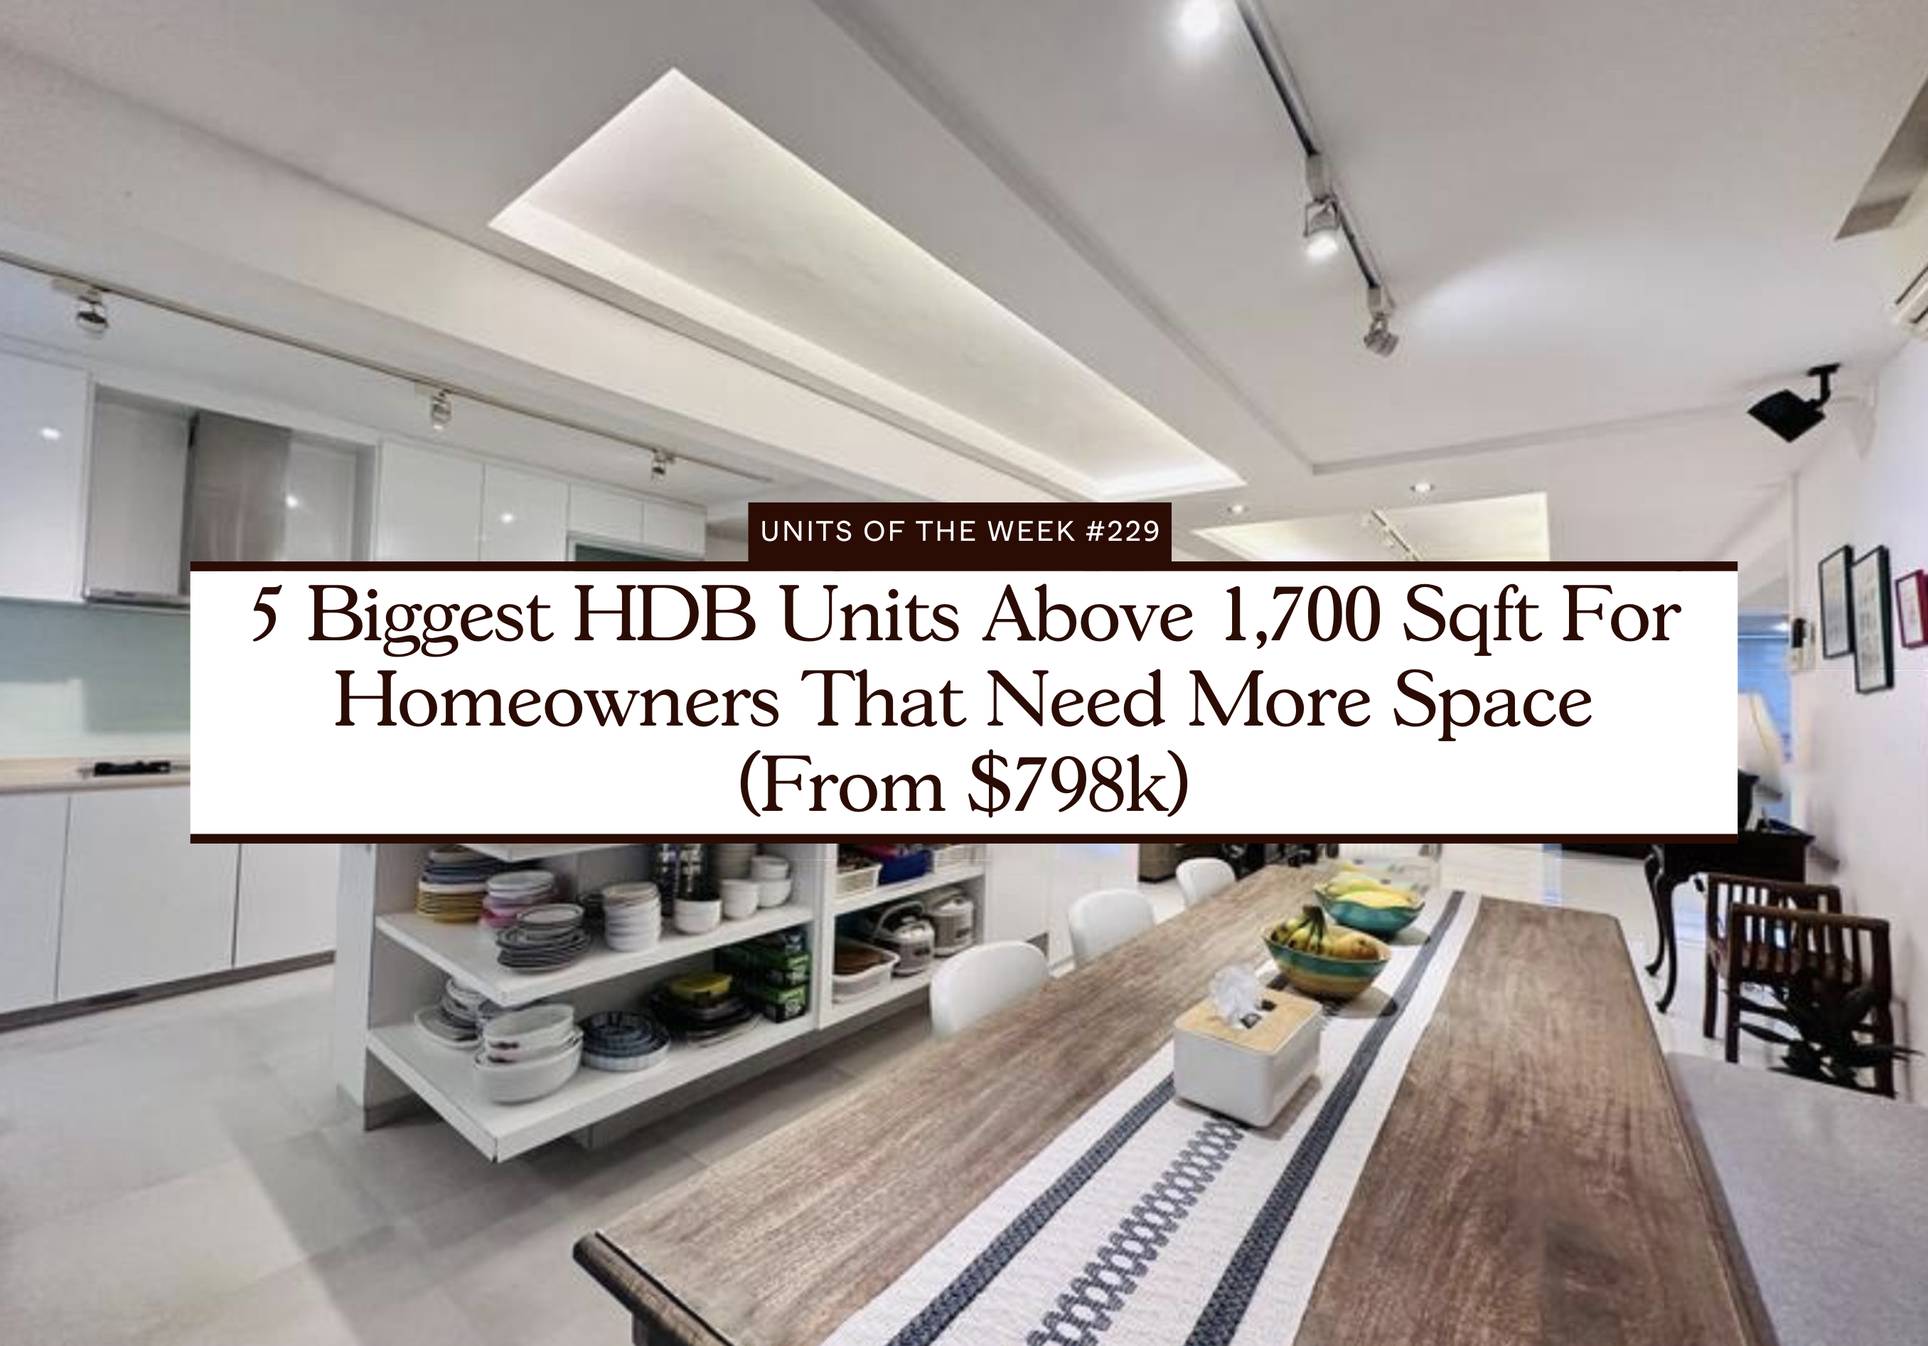 5 Biggest HDB Units Above 1,700 Sqft For Homeowners That Need More Space (From $798k)